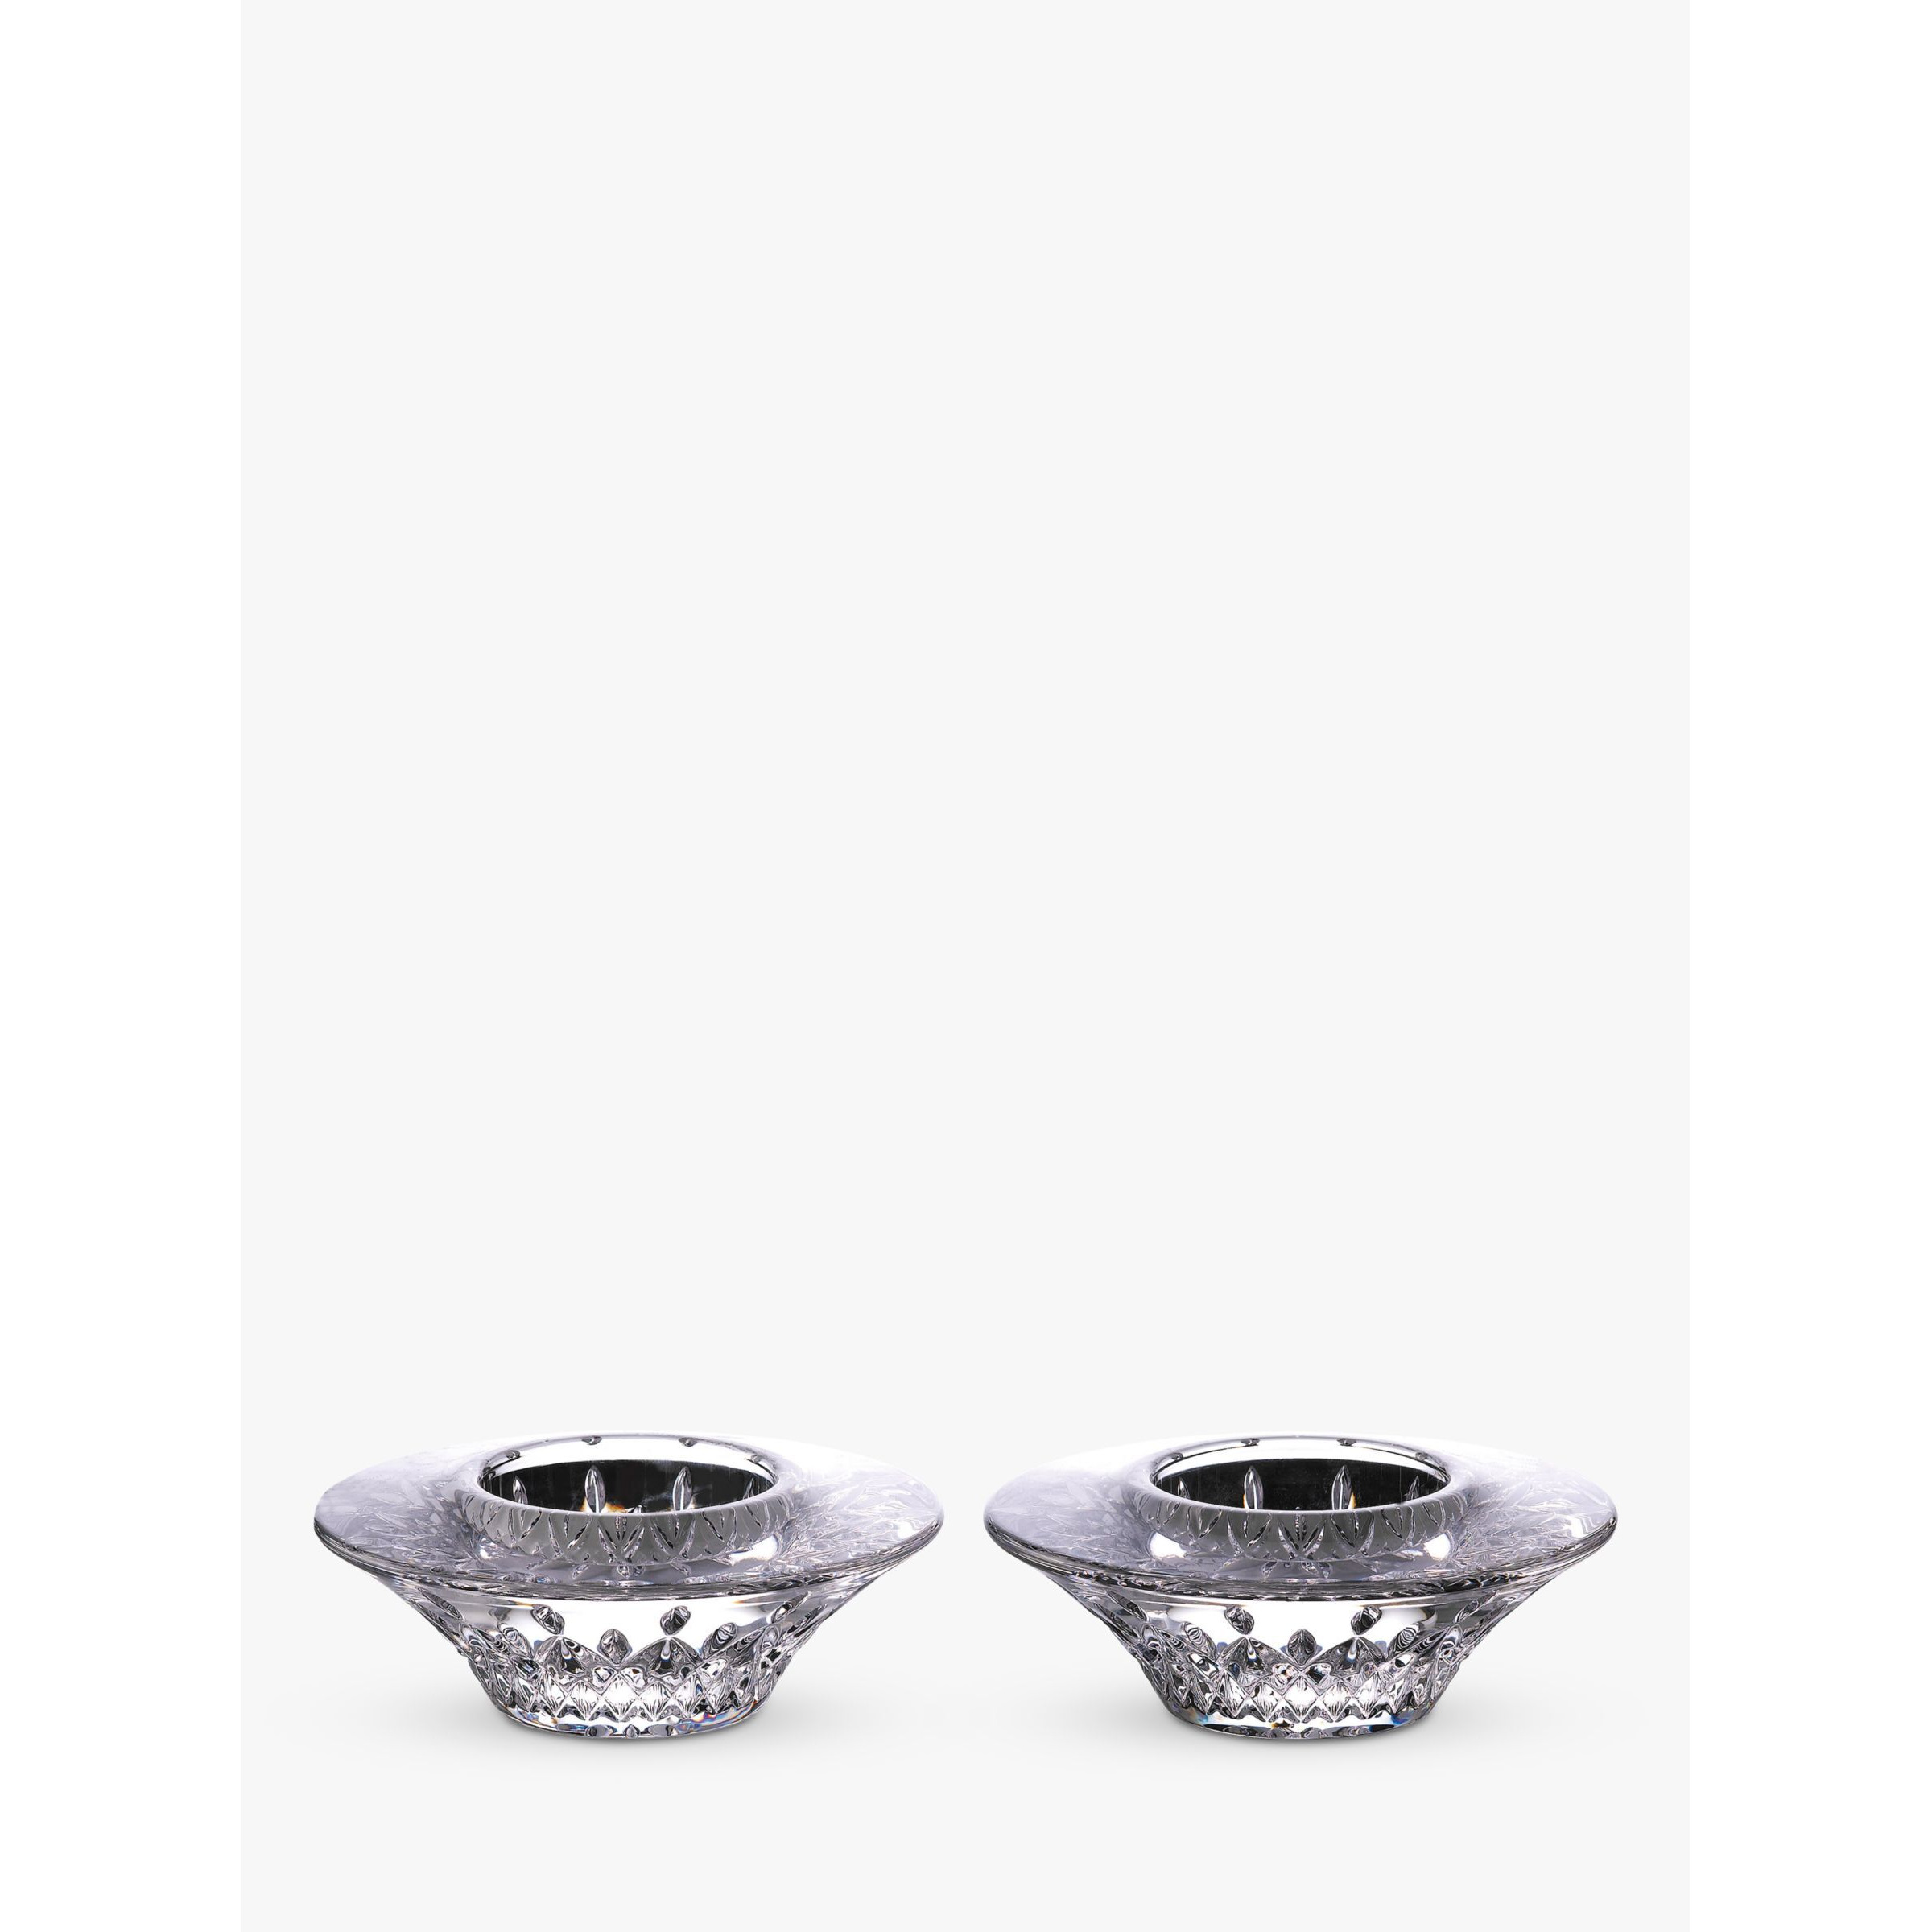 Waterford Crystal Lismore Cut Glass Votive Candle Holders, Set of 2 - image 1